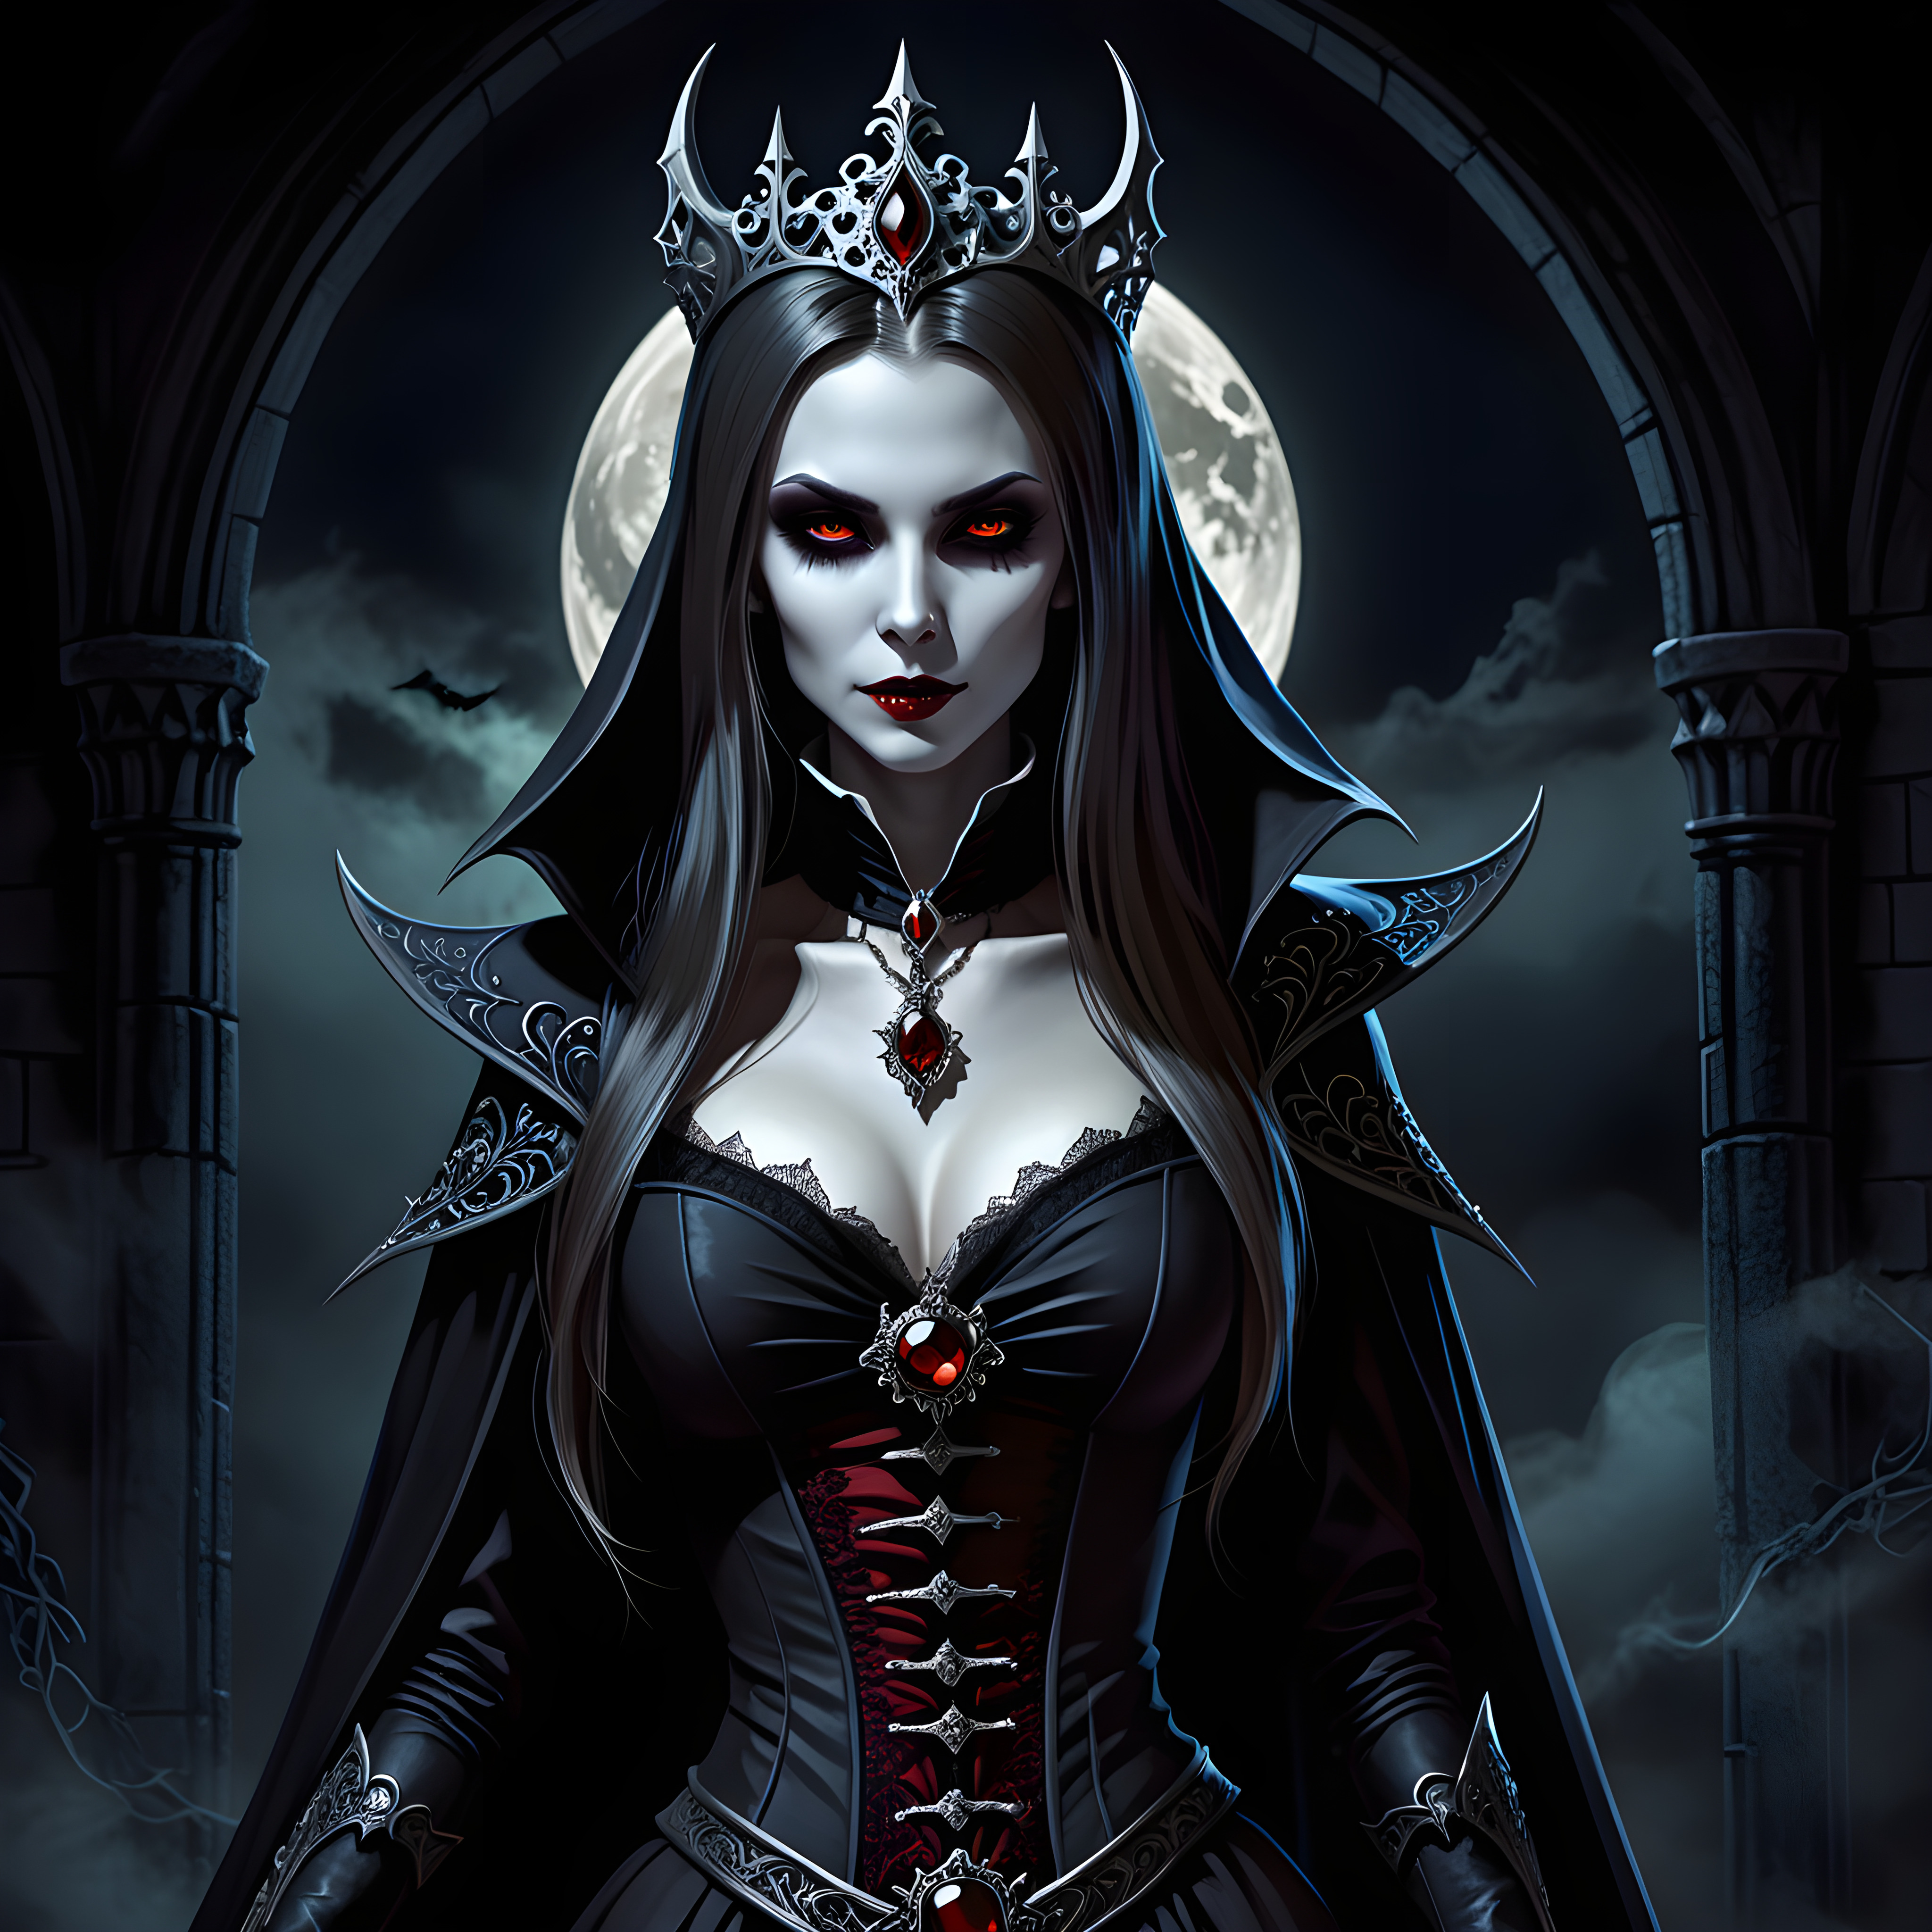 The vampiress and the moon